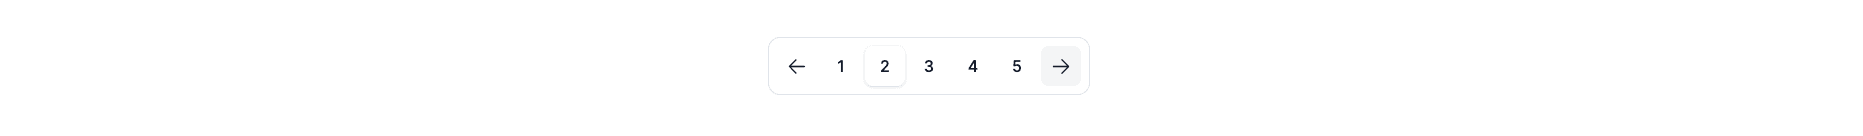 Pagination Style 2